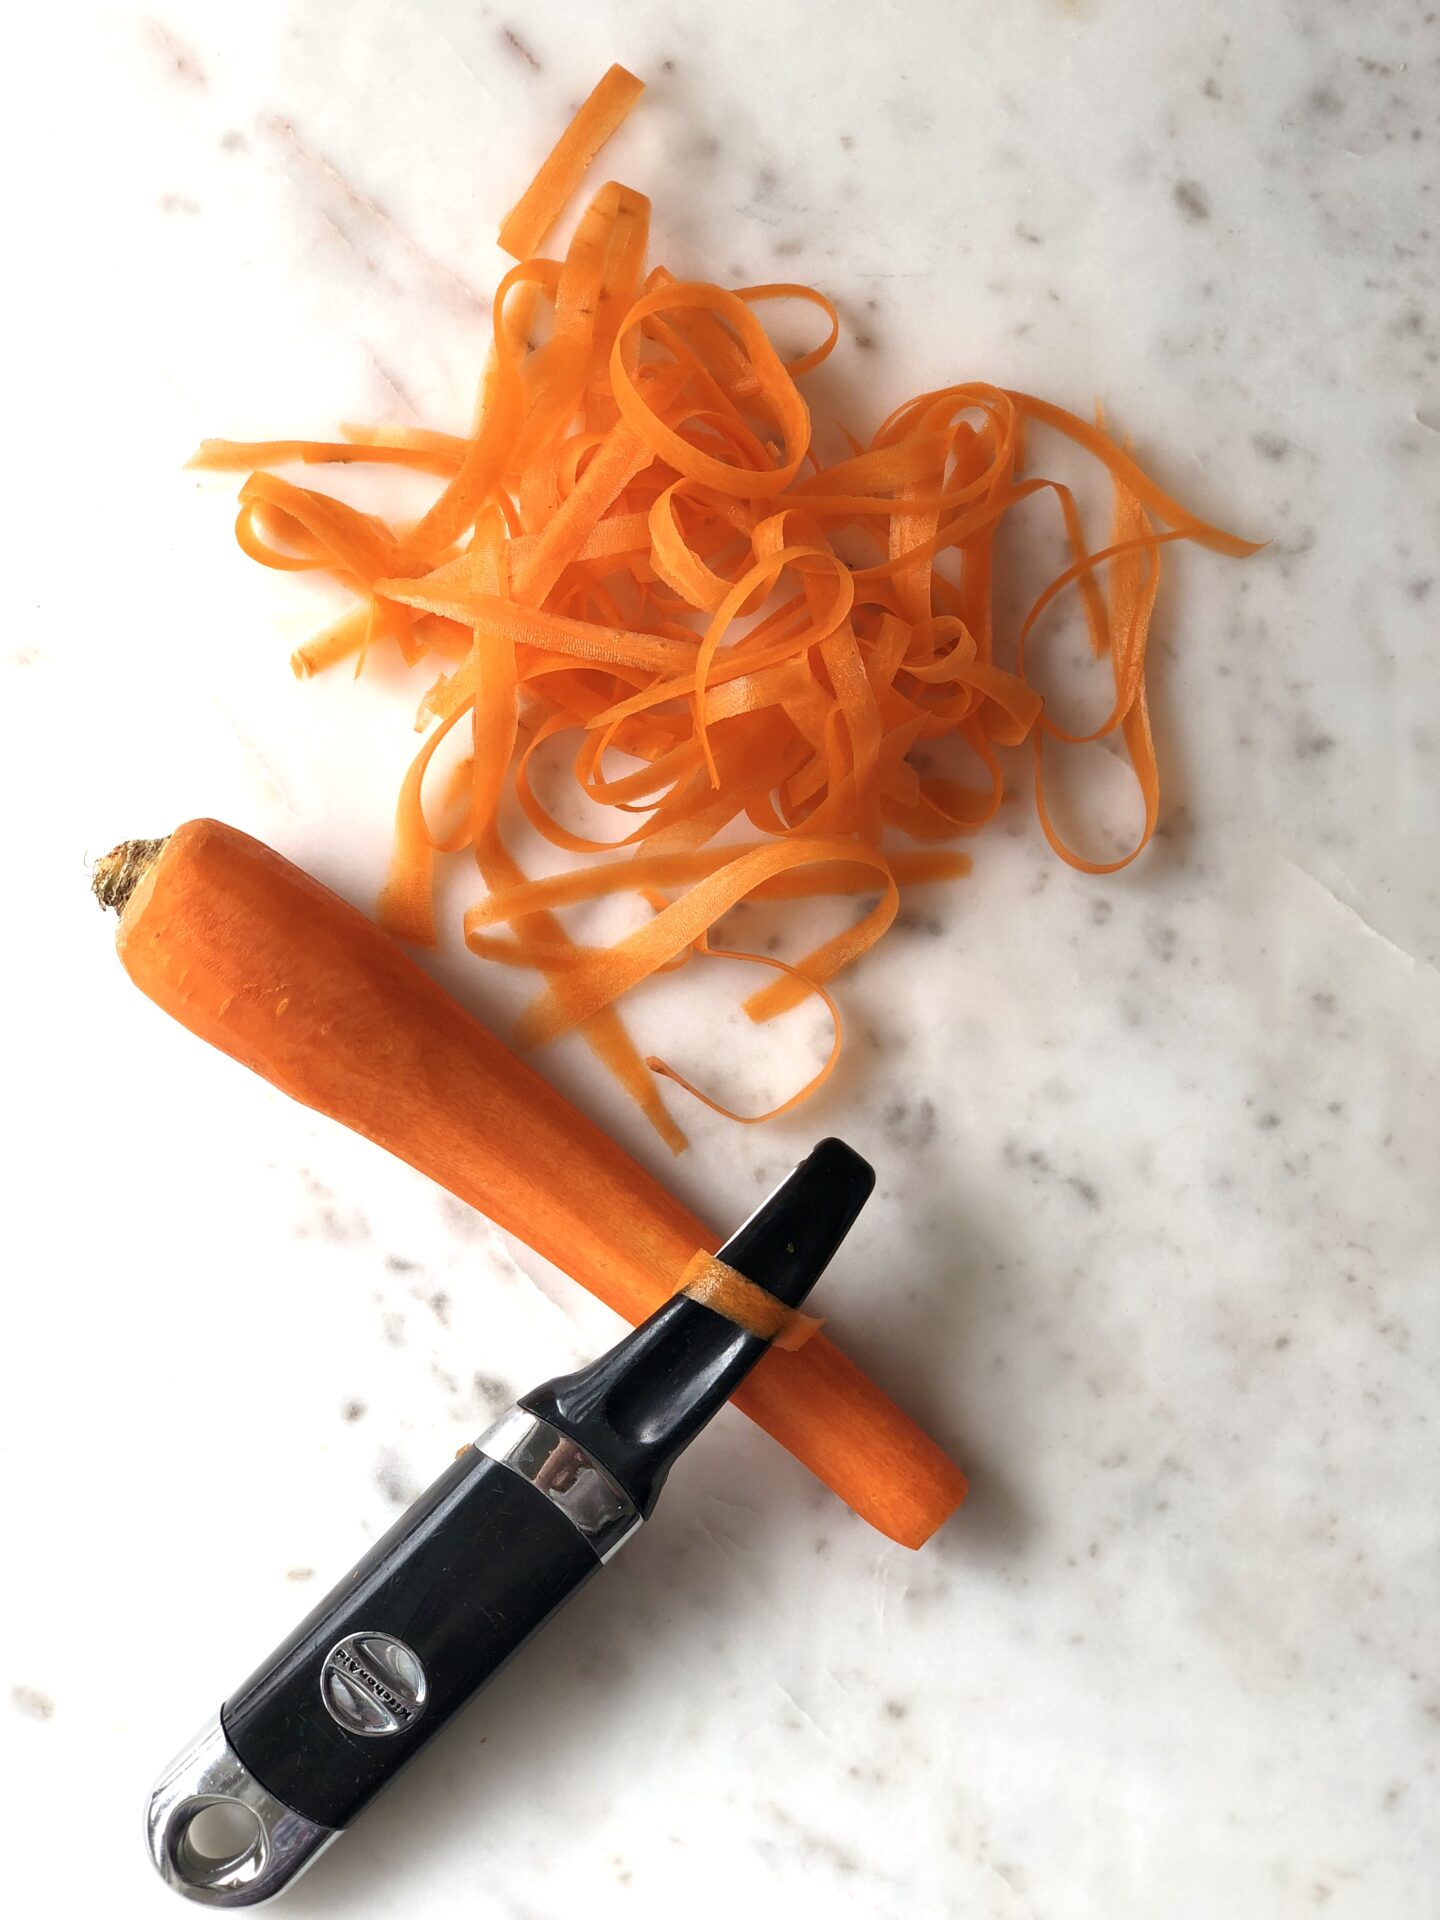 Carrot being cut into ribbons with a vegetable peeler